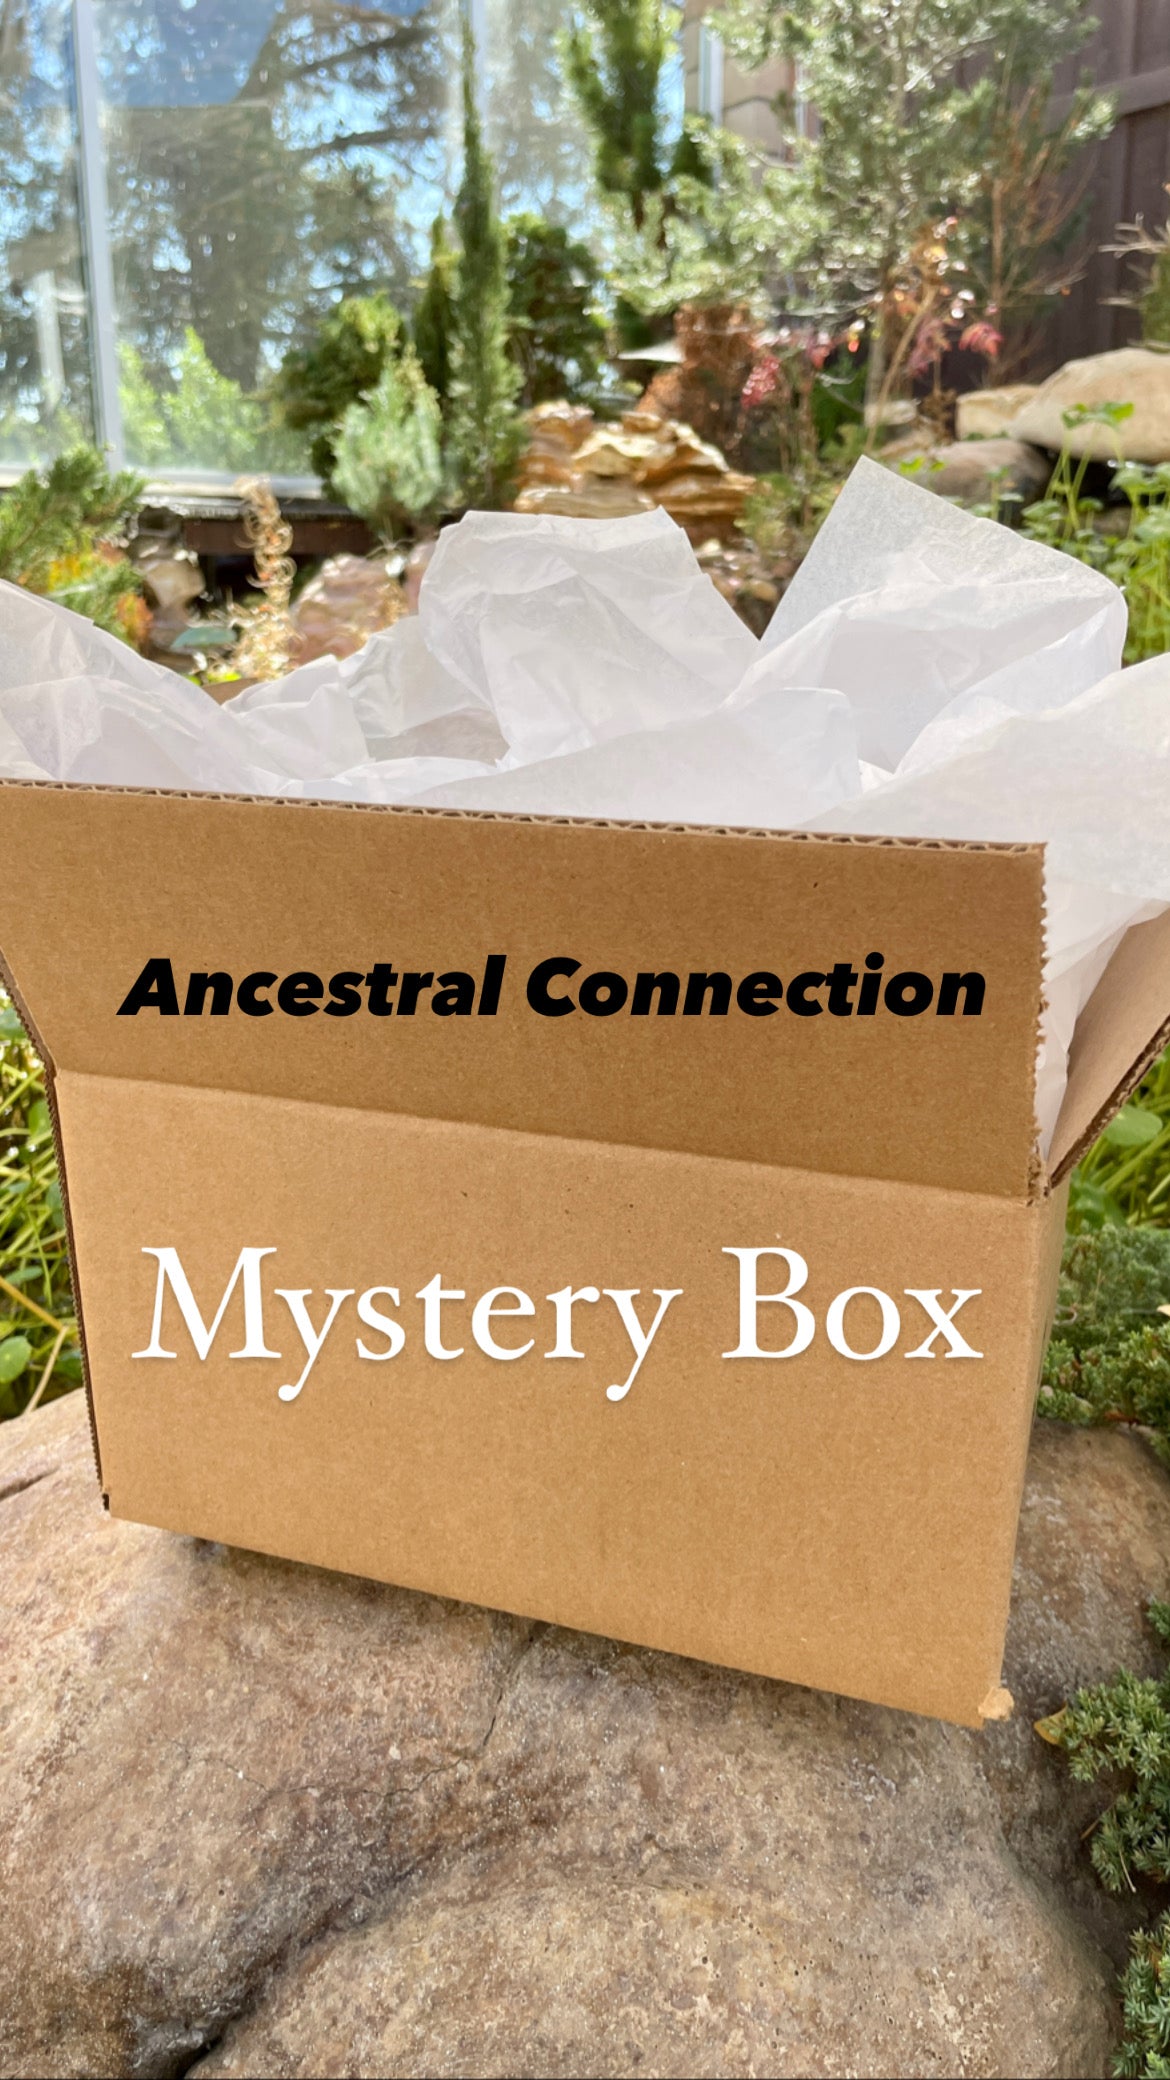 Ancestral Connection Mystery Box $175